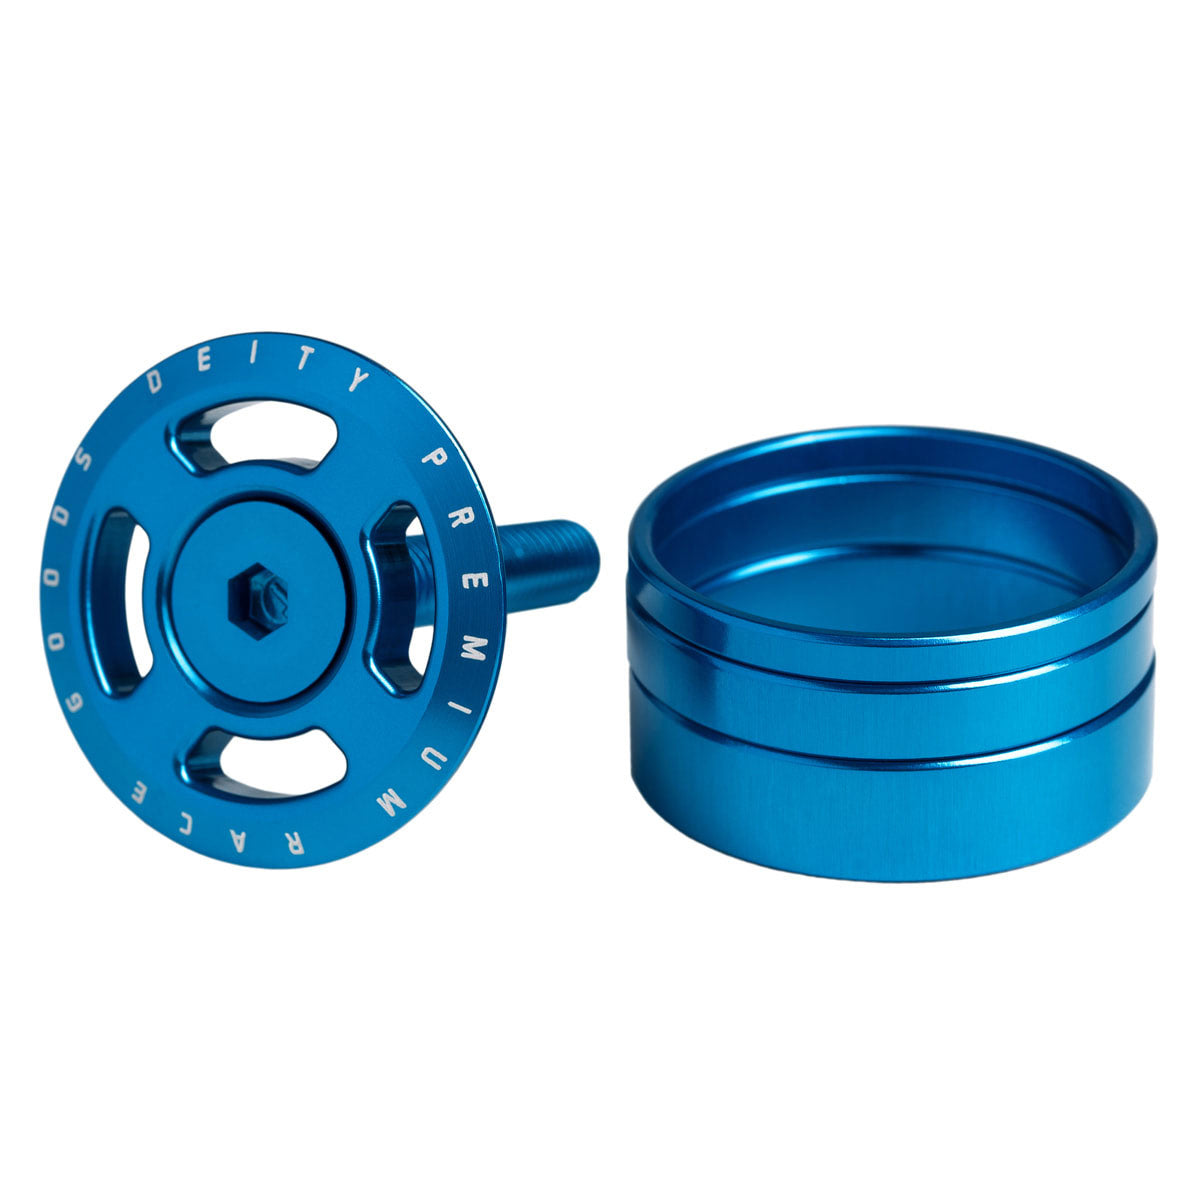 Deity Crosshair Headset Spacer and Top Cap Kit - Blue